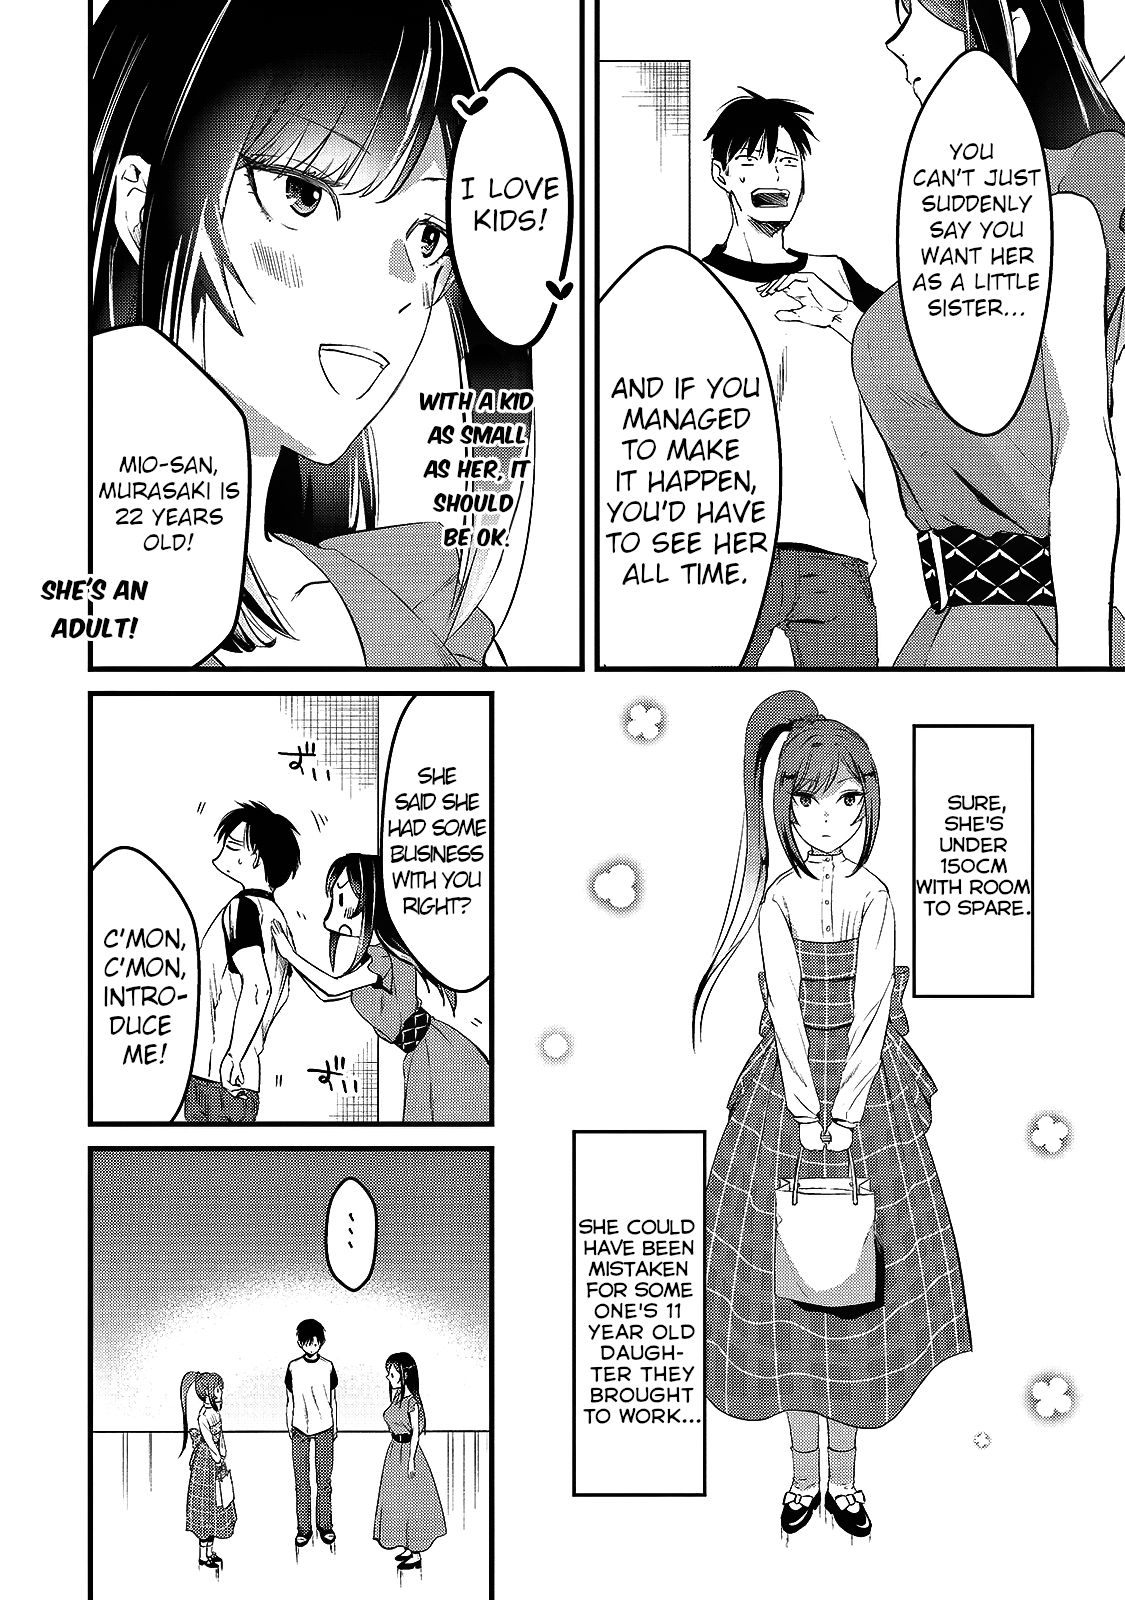 It's Fun Having a 300,000 Yen a Month Job Welcoming Home an Onee-san Who Doesn't Find Meaning in a Job That Pays Her 500,000 Yen a Month chapter 6 page 18